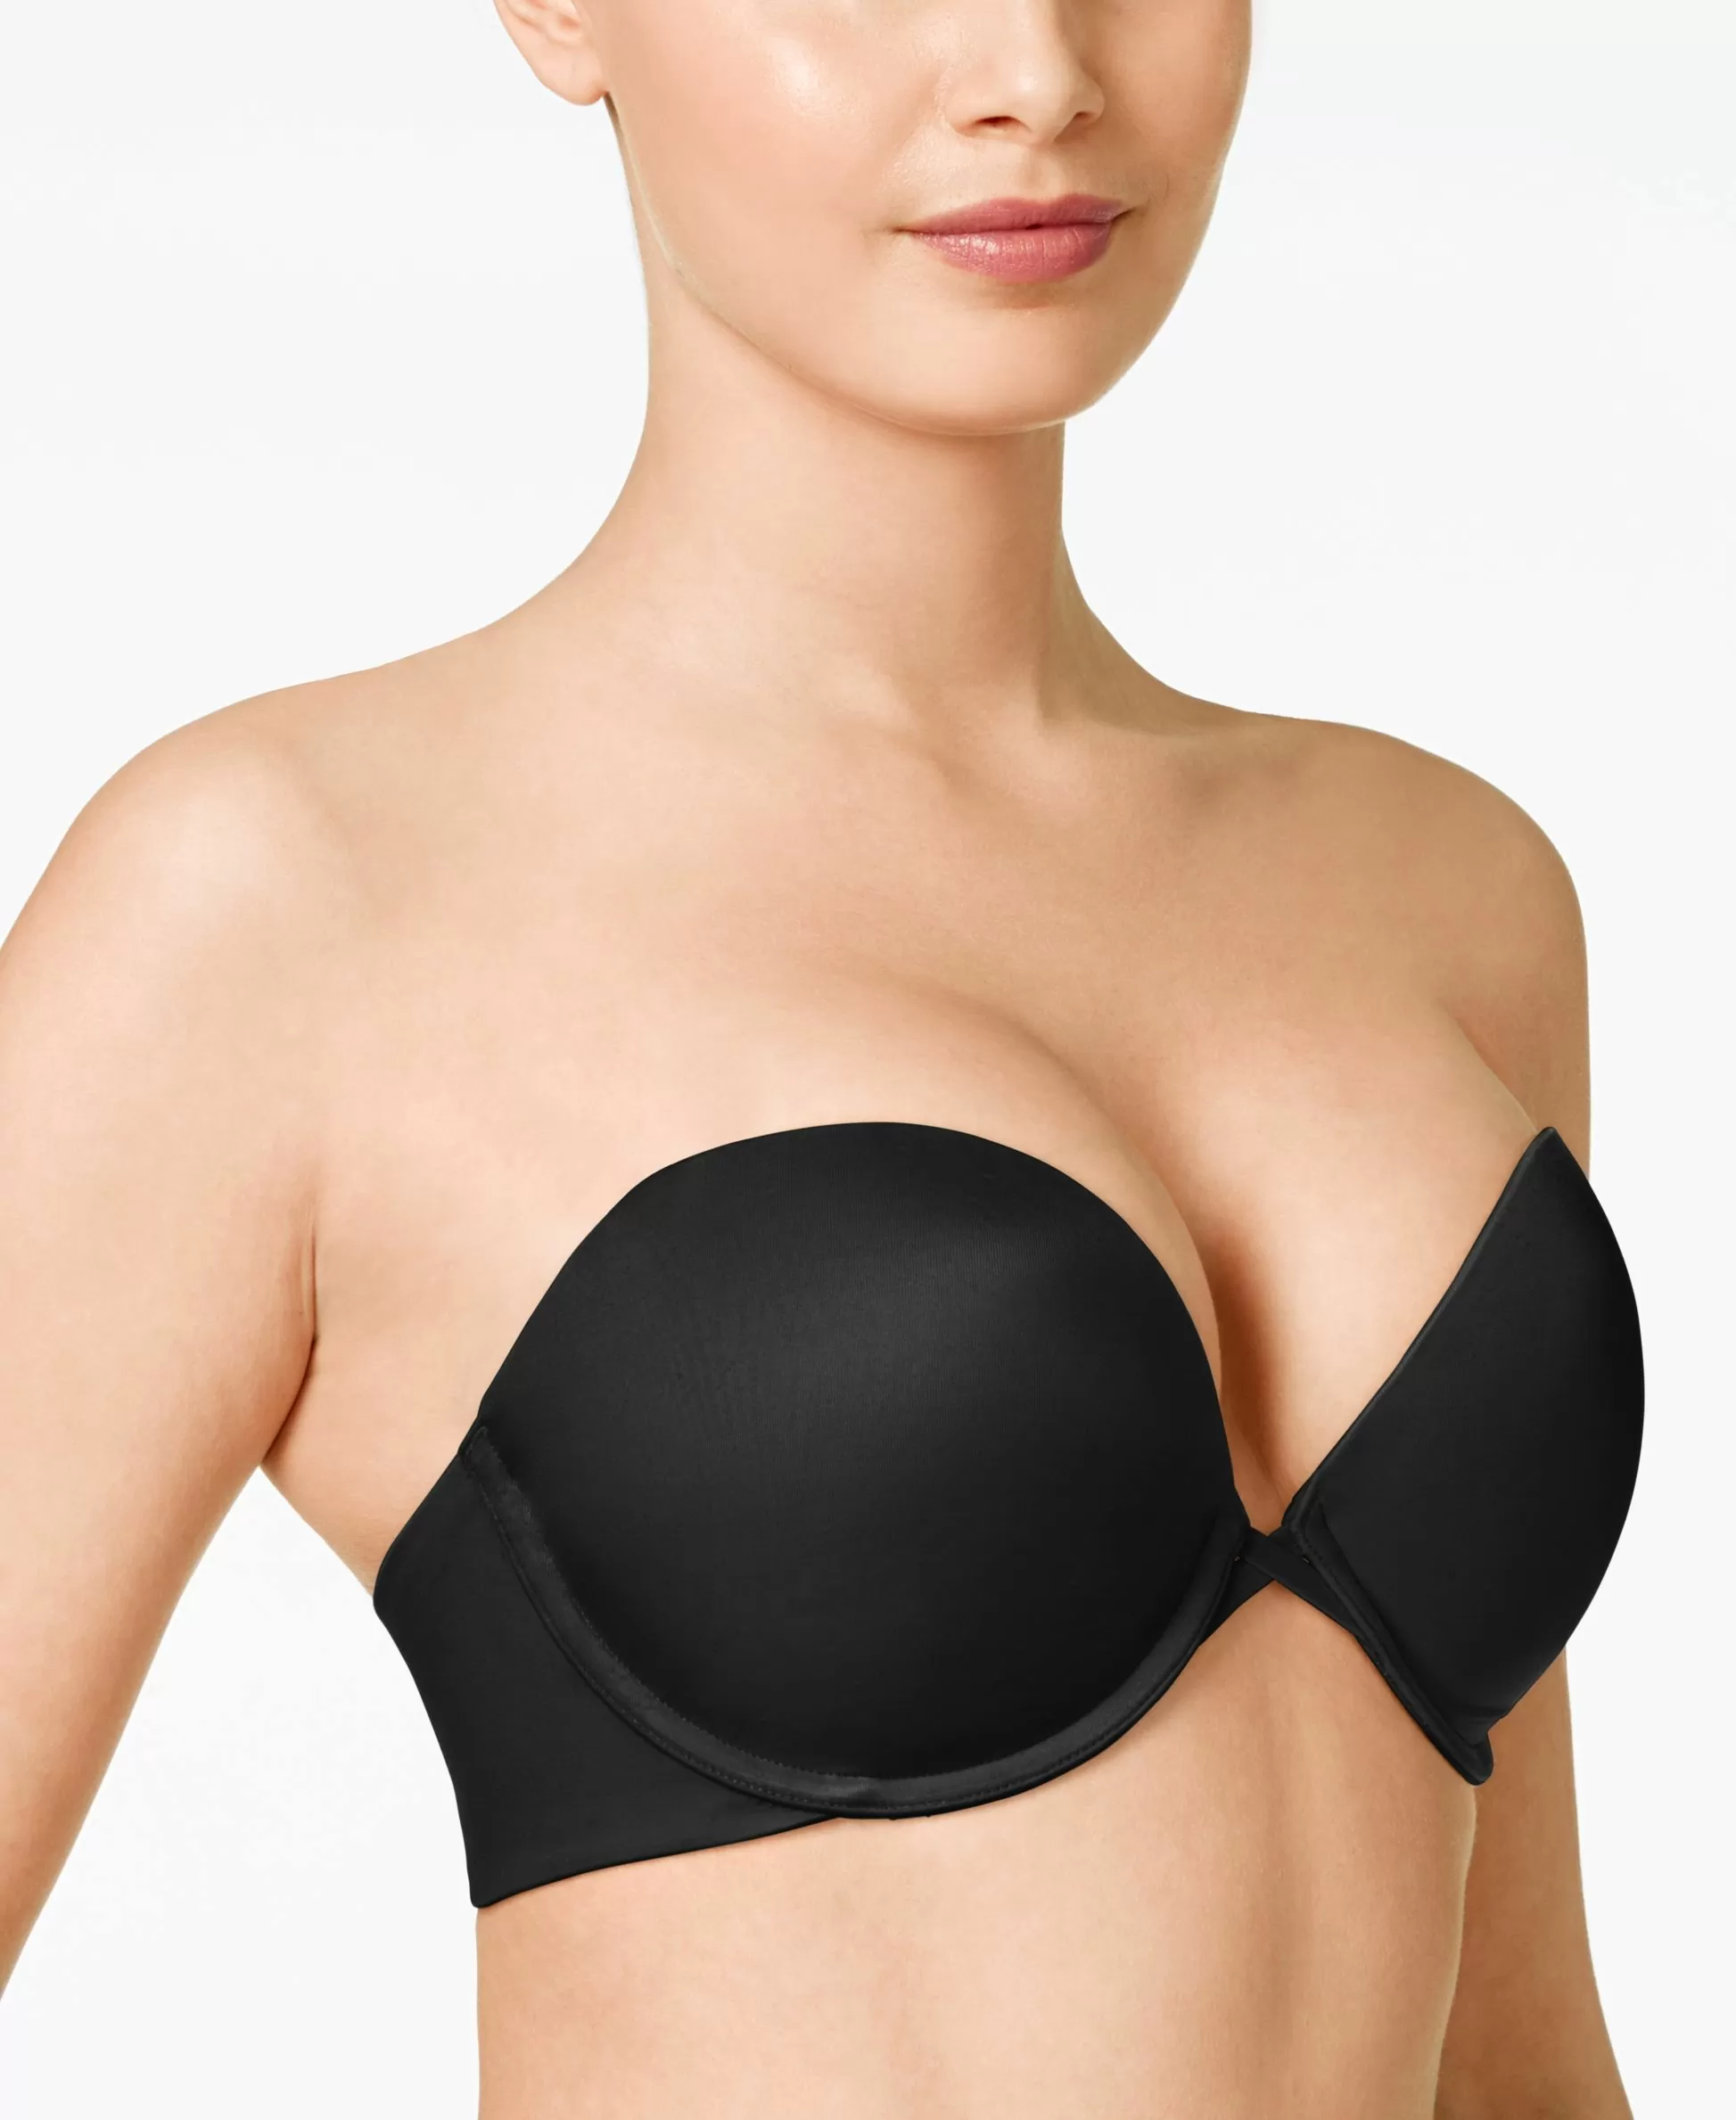 Top 5 Pushup Bras Every Women Should Know About